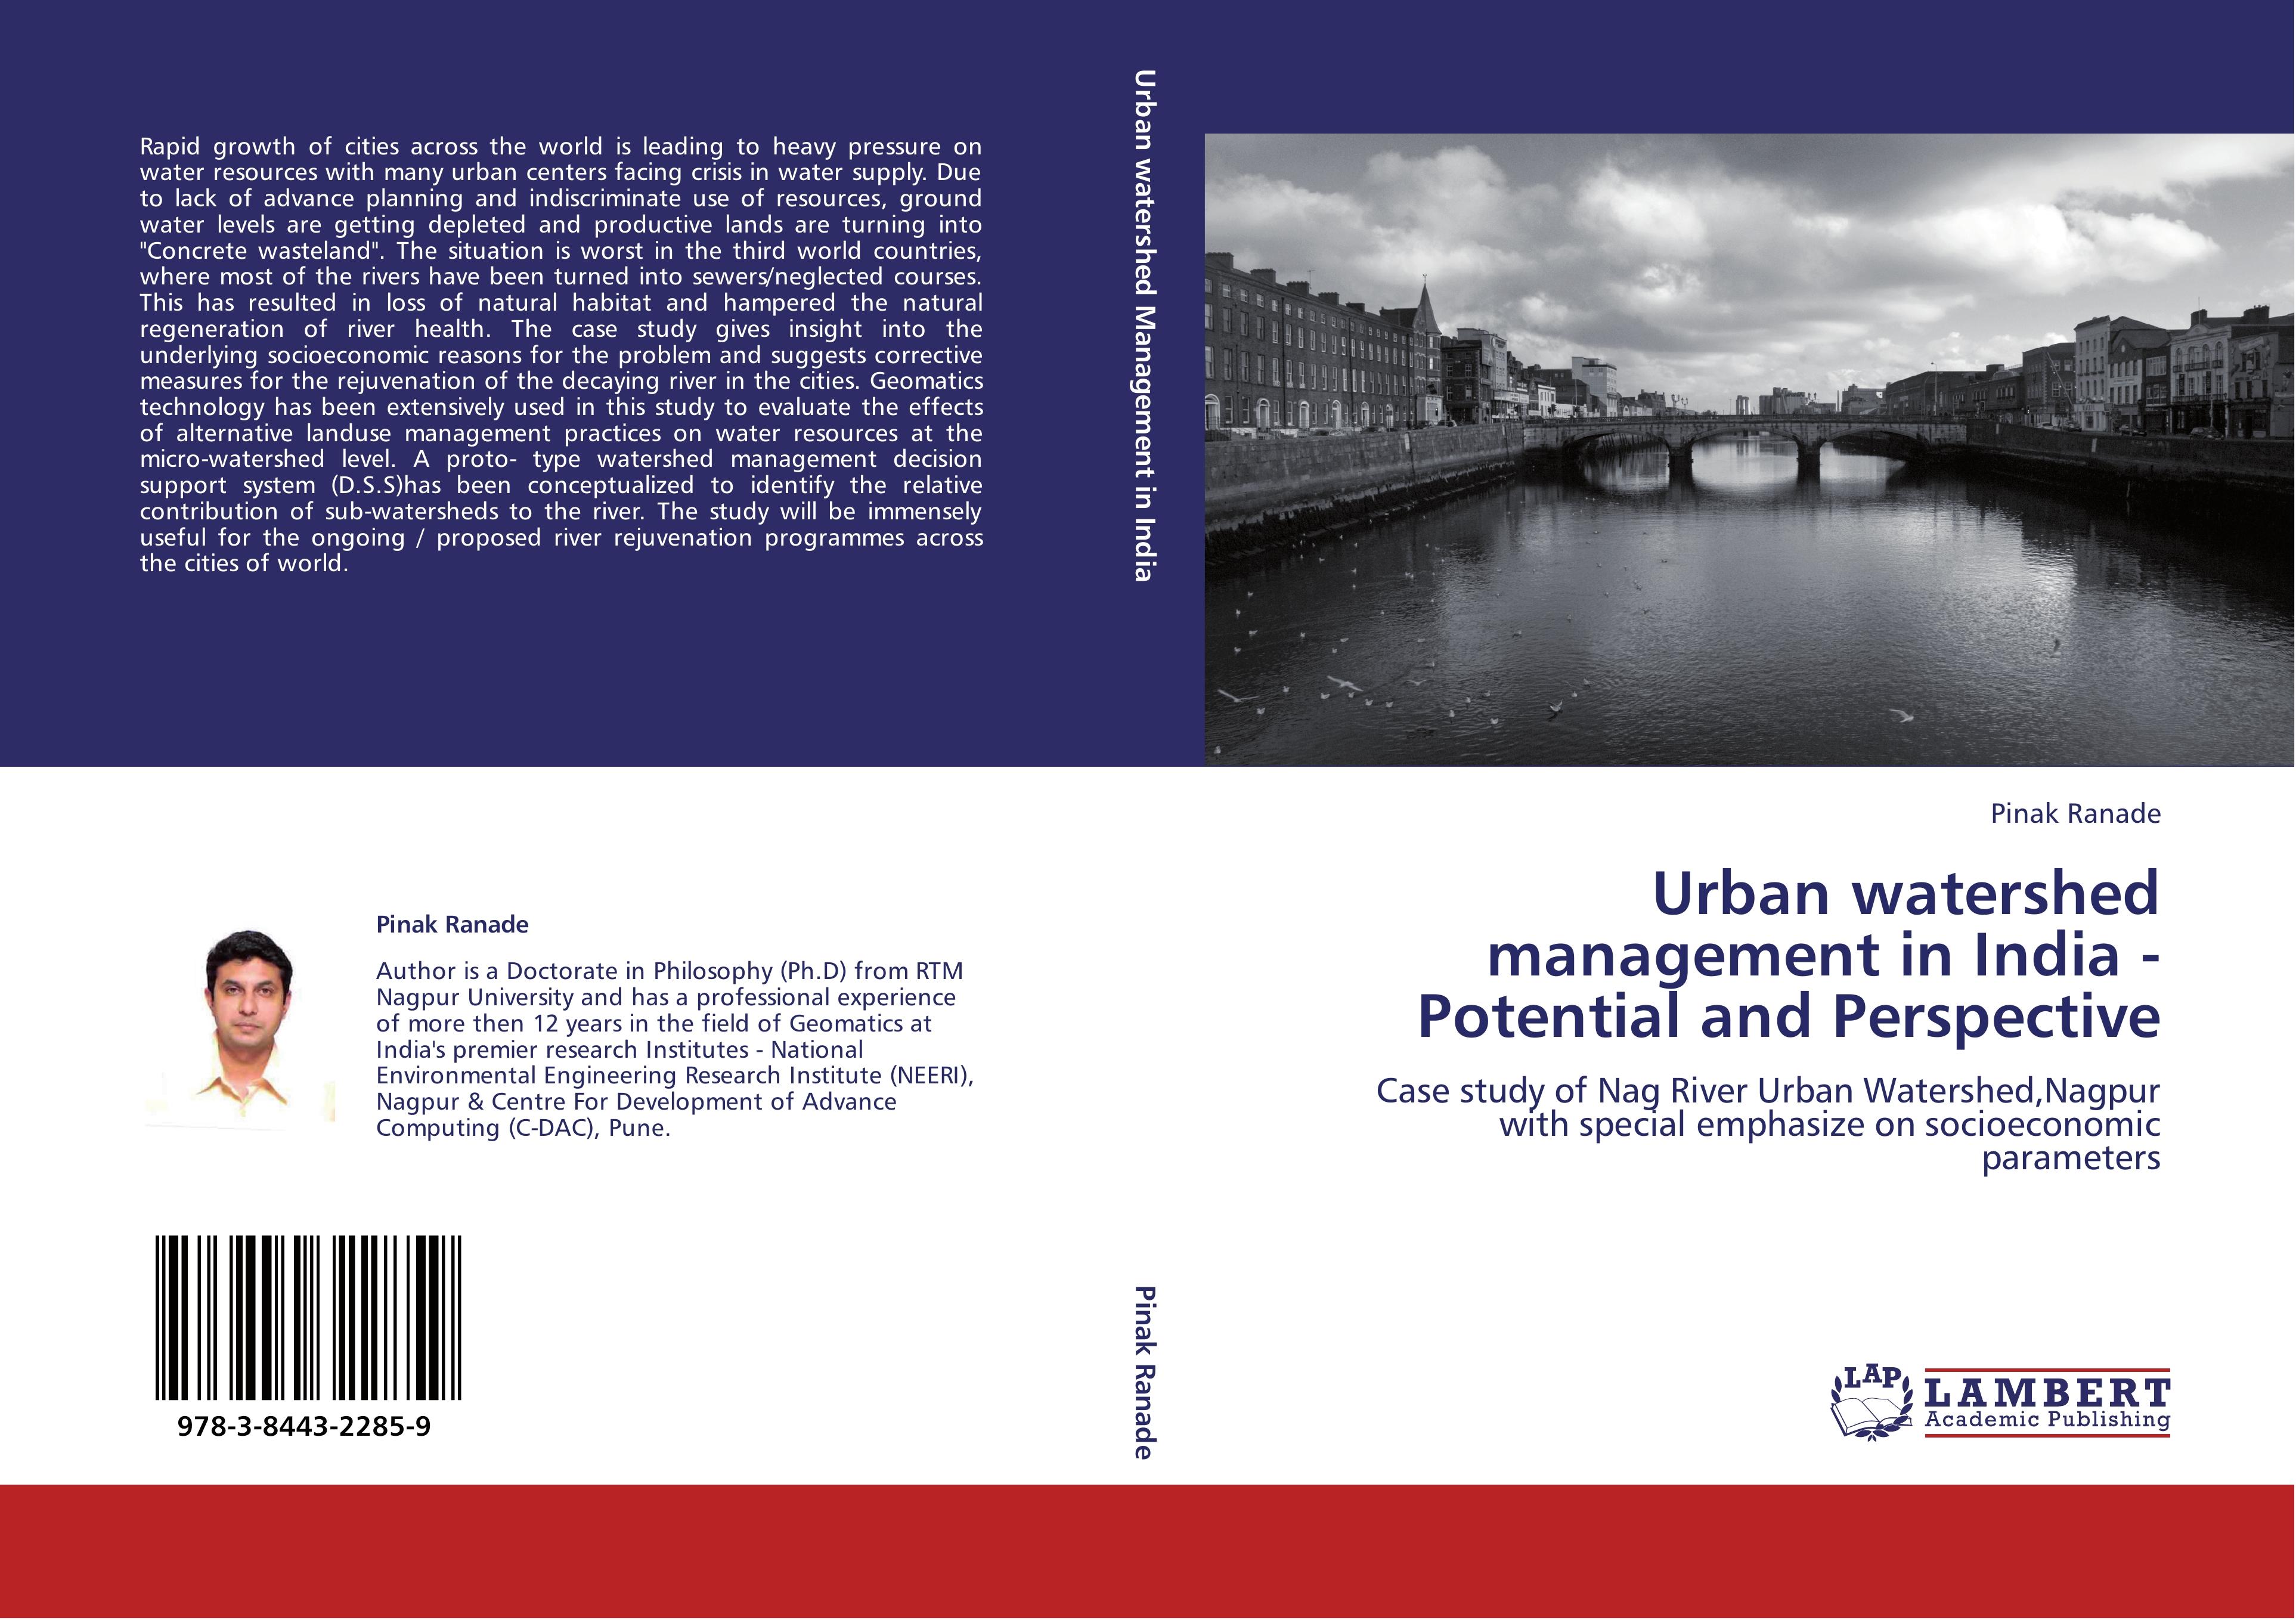 Urban watershed management in India - Potential and Perspective - Pinak Ranade